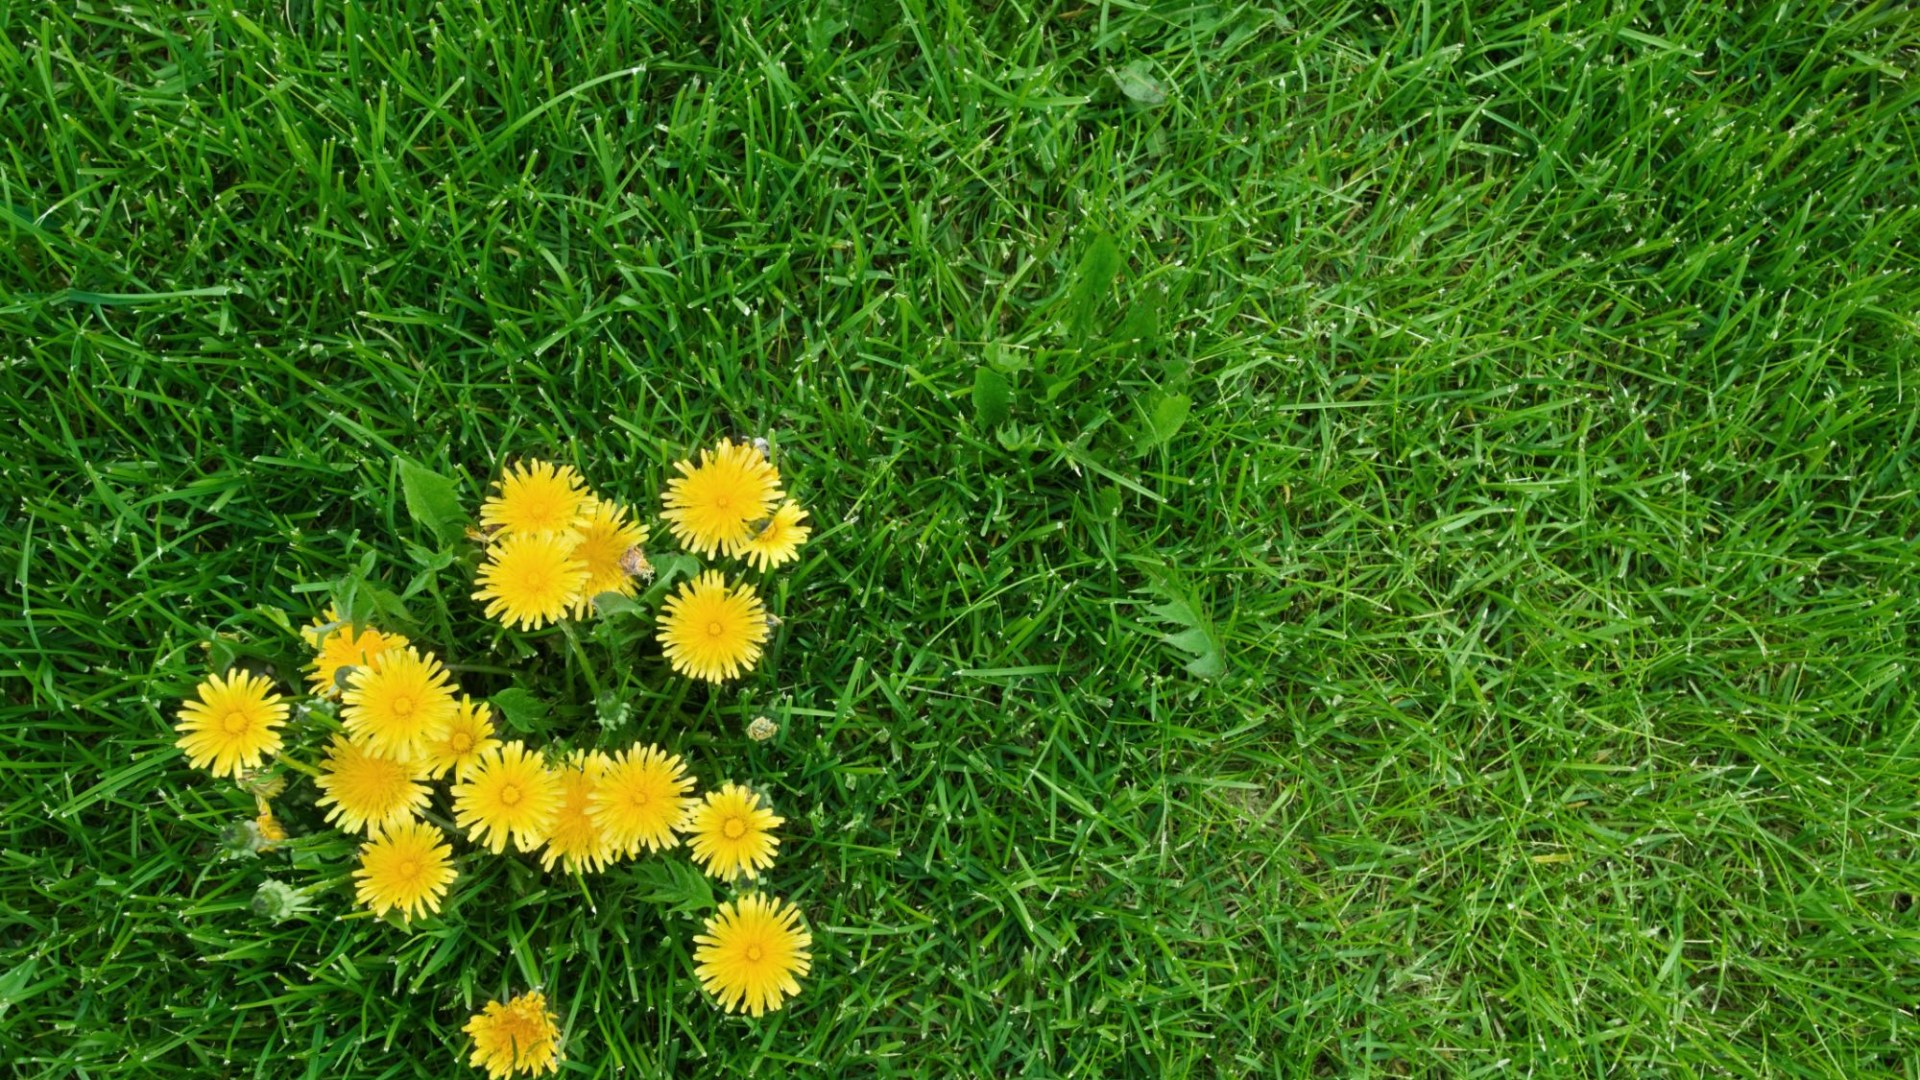 Four clever ways to get rid of dandelions for good in your garden without breaking the bank [Video]